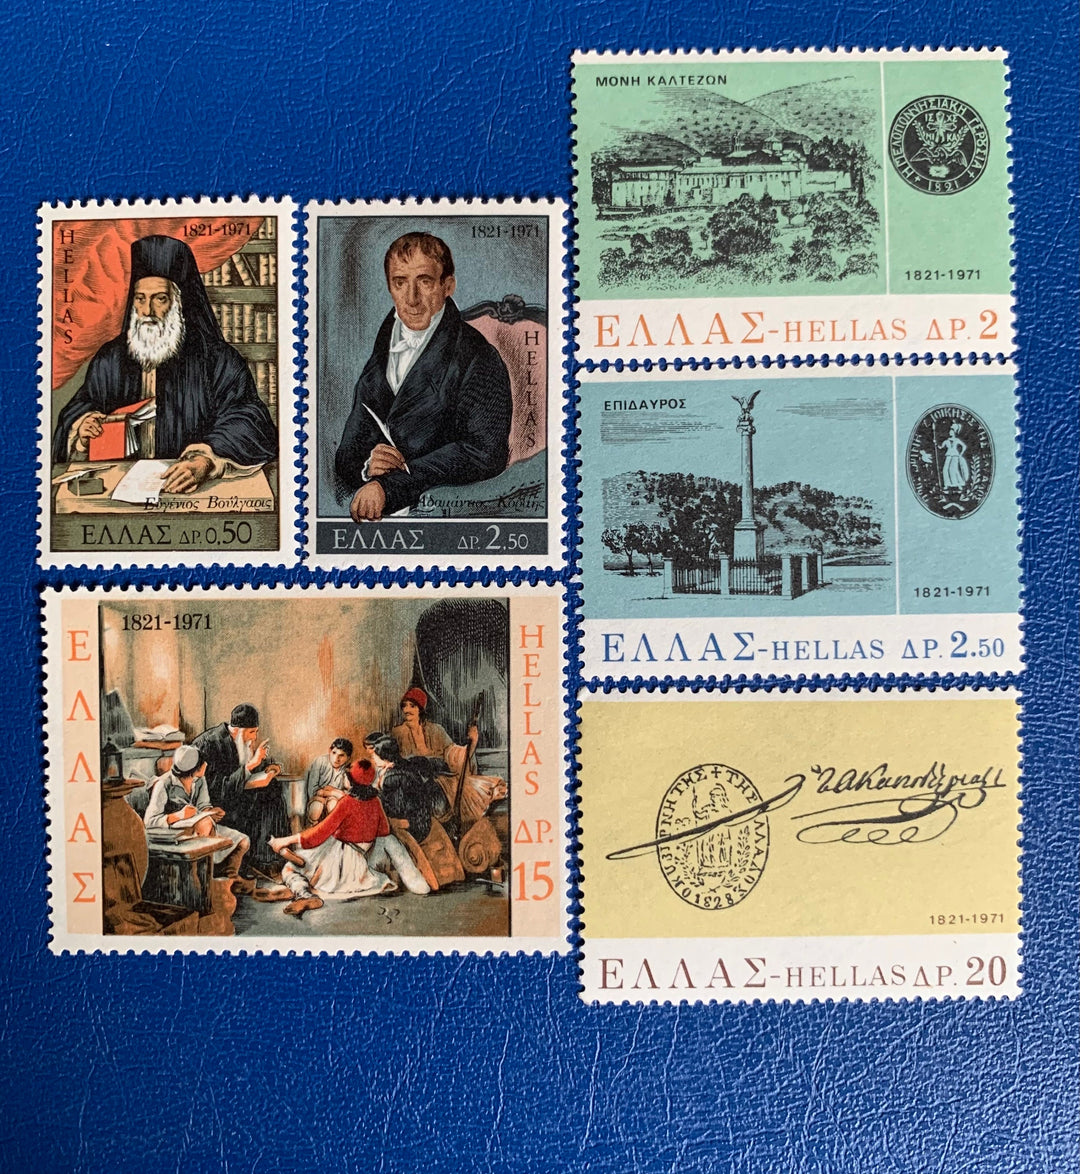 Greece - Original Vintage Postage Stamps- 1971 - 150th Anniversary Independence War - for the collector, artist or crafter